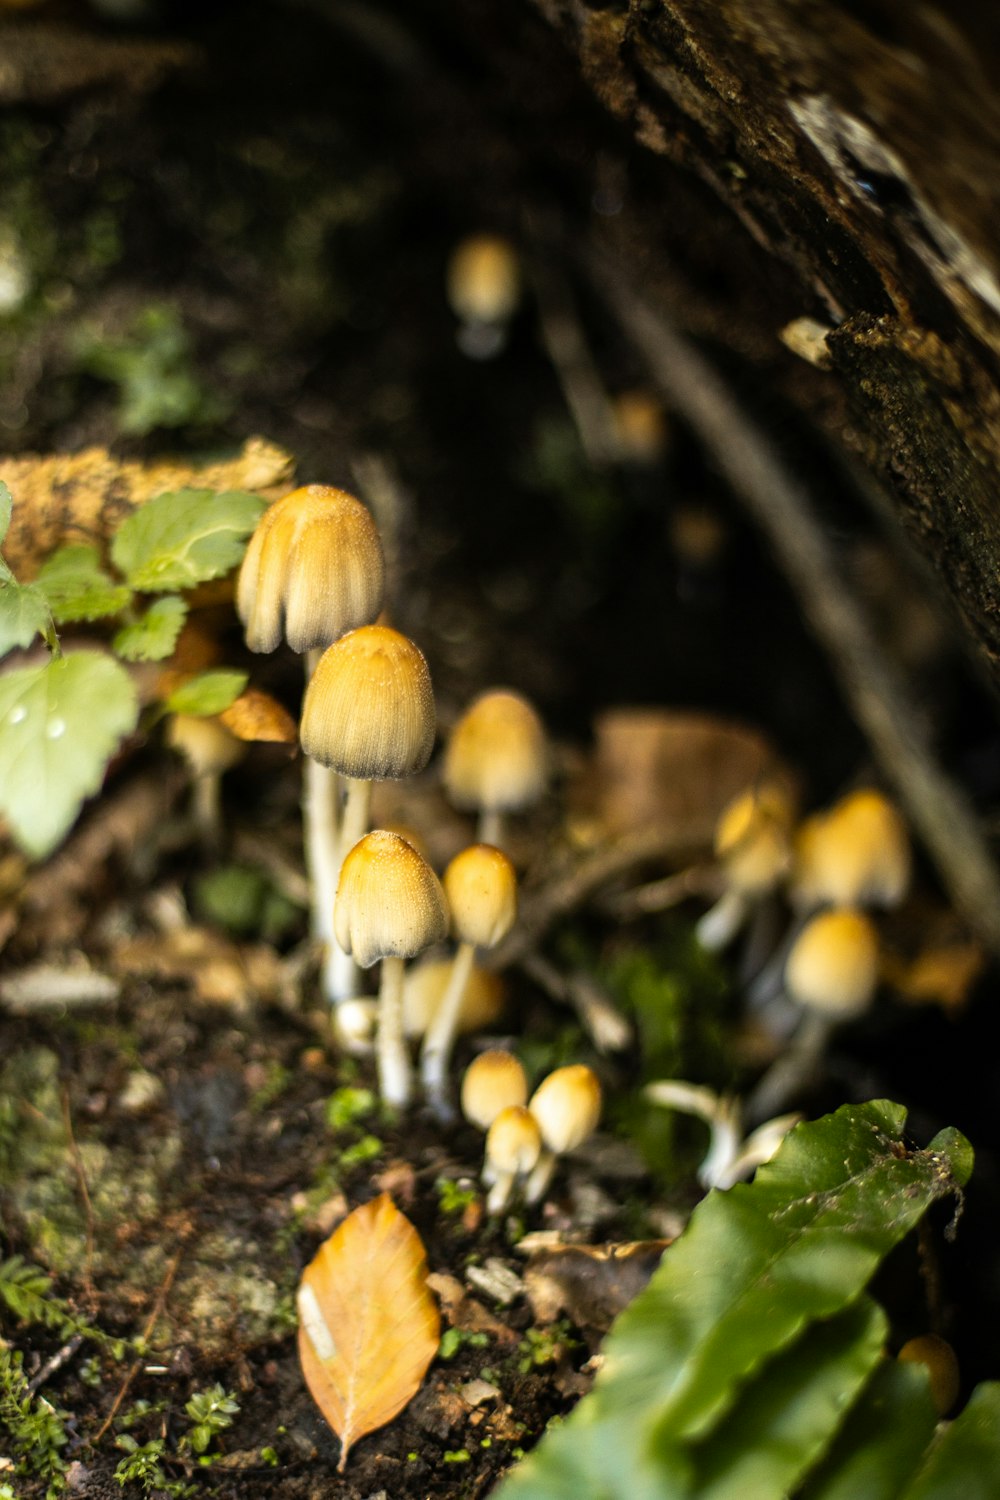 a group of small yellow mushrooms growing on the ground